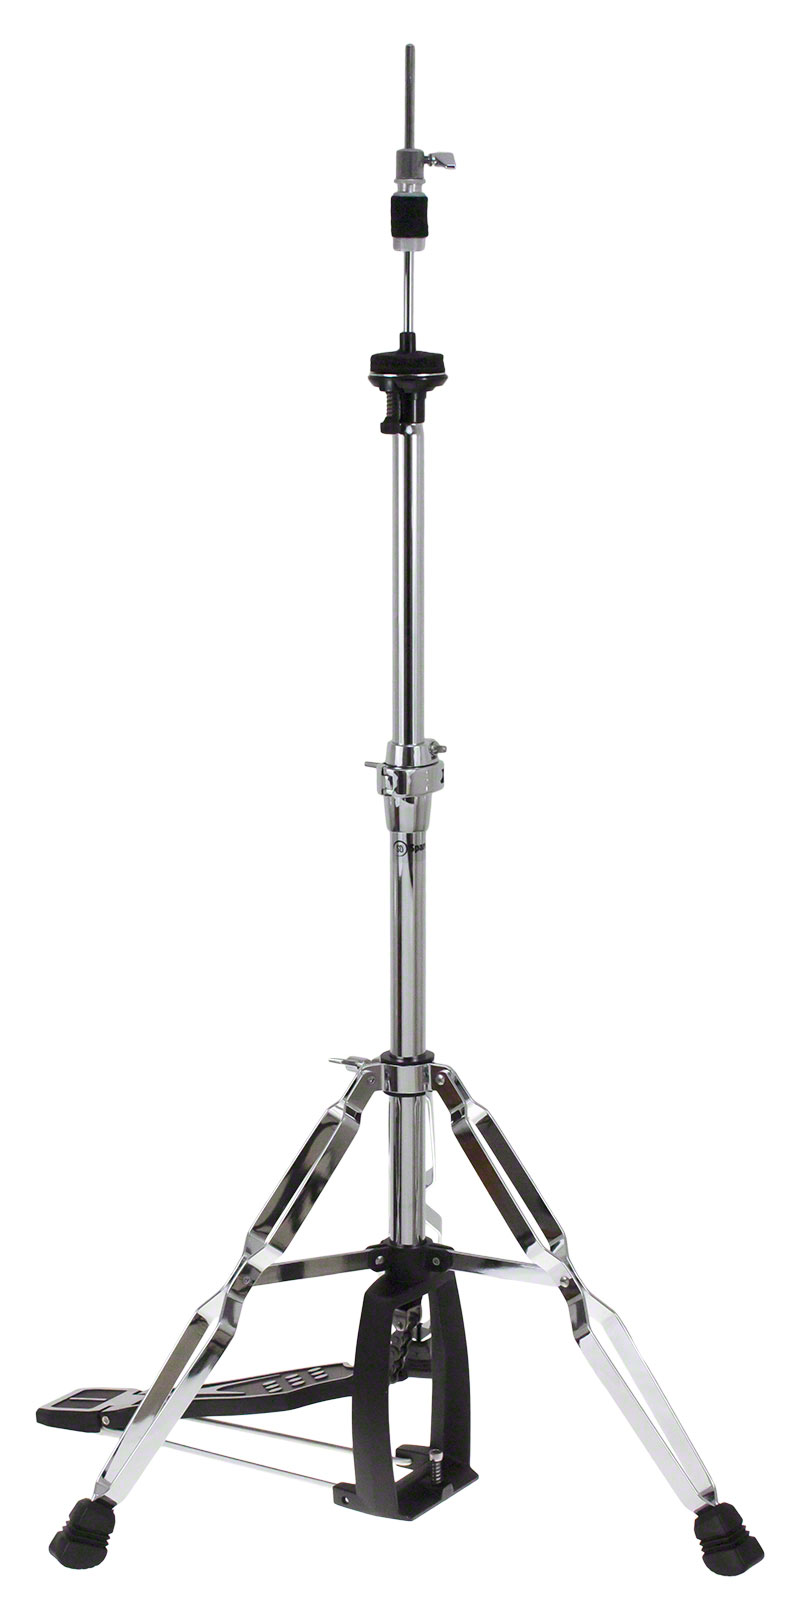 SPAREDRUM HHHS1 - PEDALE HI-HAT DOUBLE EMBASE